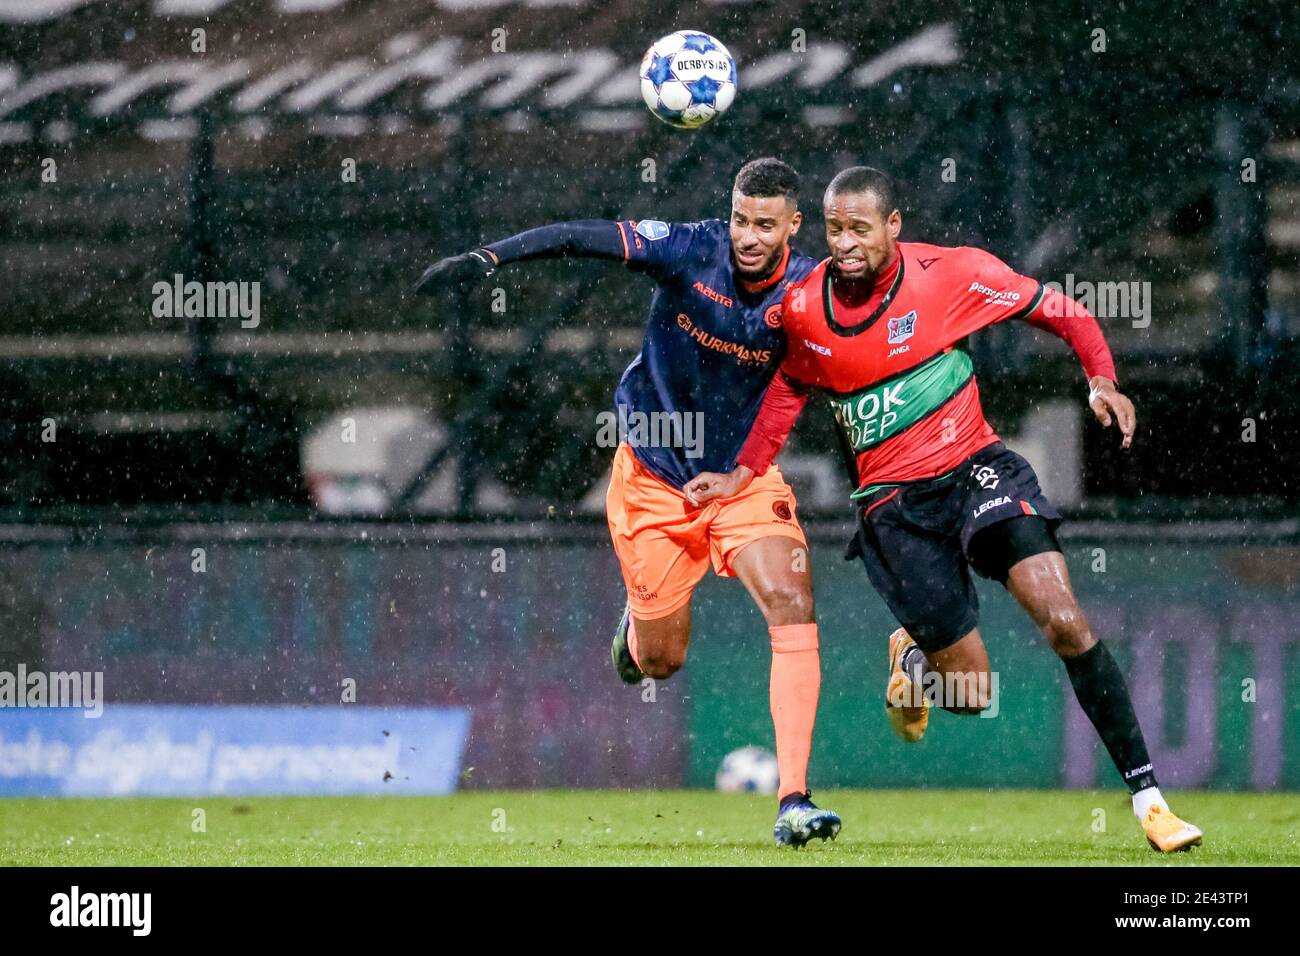 NIJMEGEN, NETHERLANDS - JANUARY 21: (L-R): Martin Yves Angha of Fortuna Sittard, Rangelo Janga of NEC during the Dutch KNVB Cup match between NEC and Stock Photo